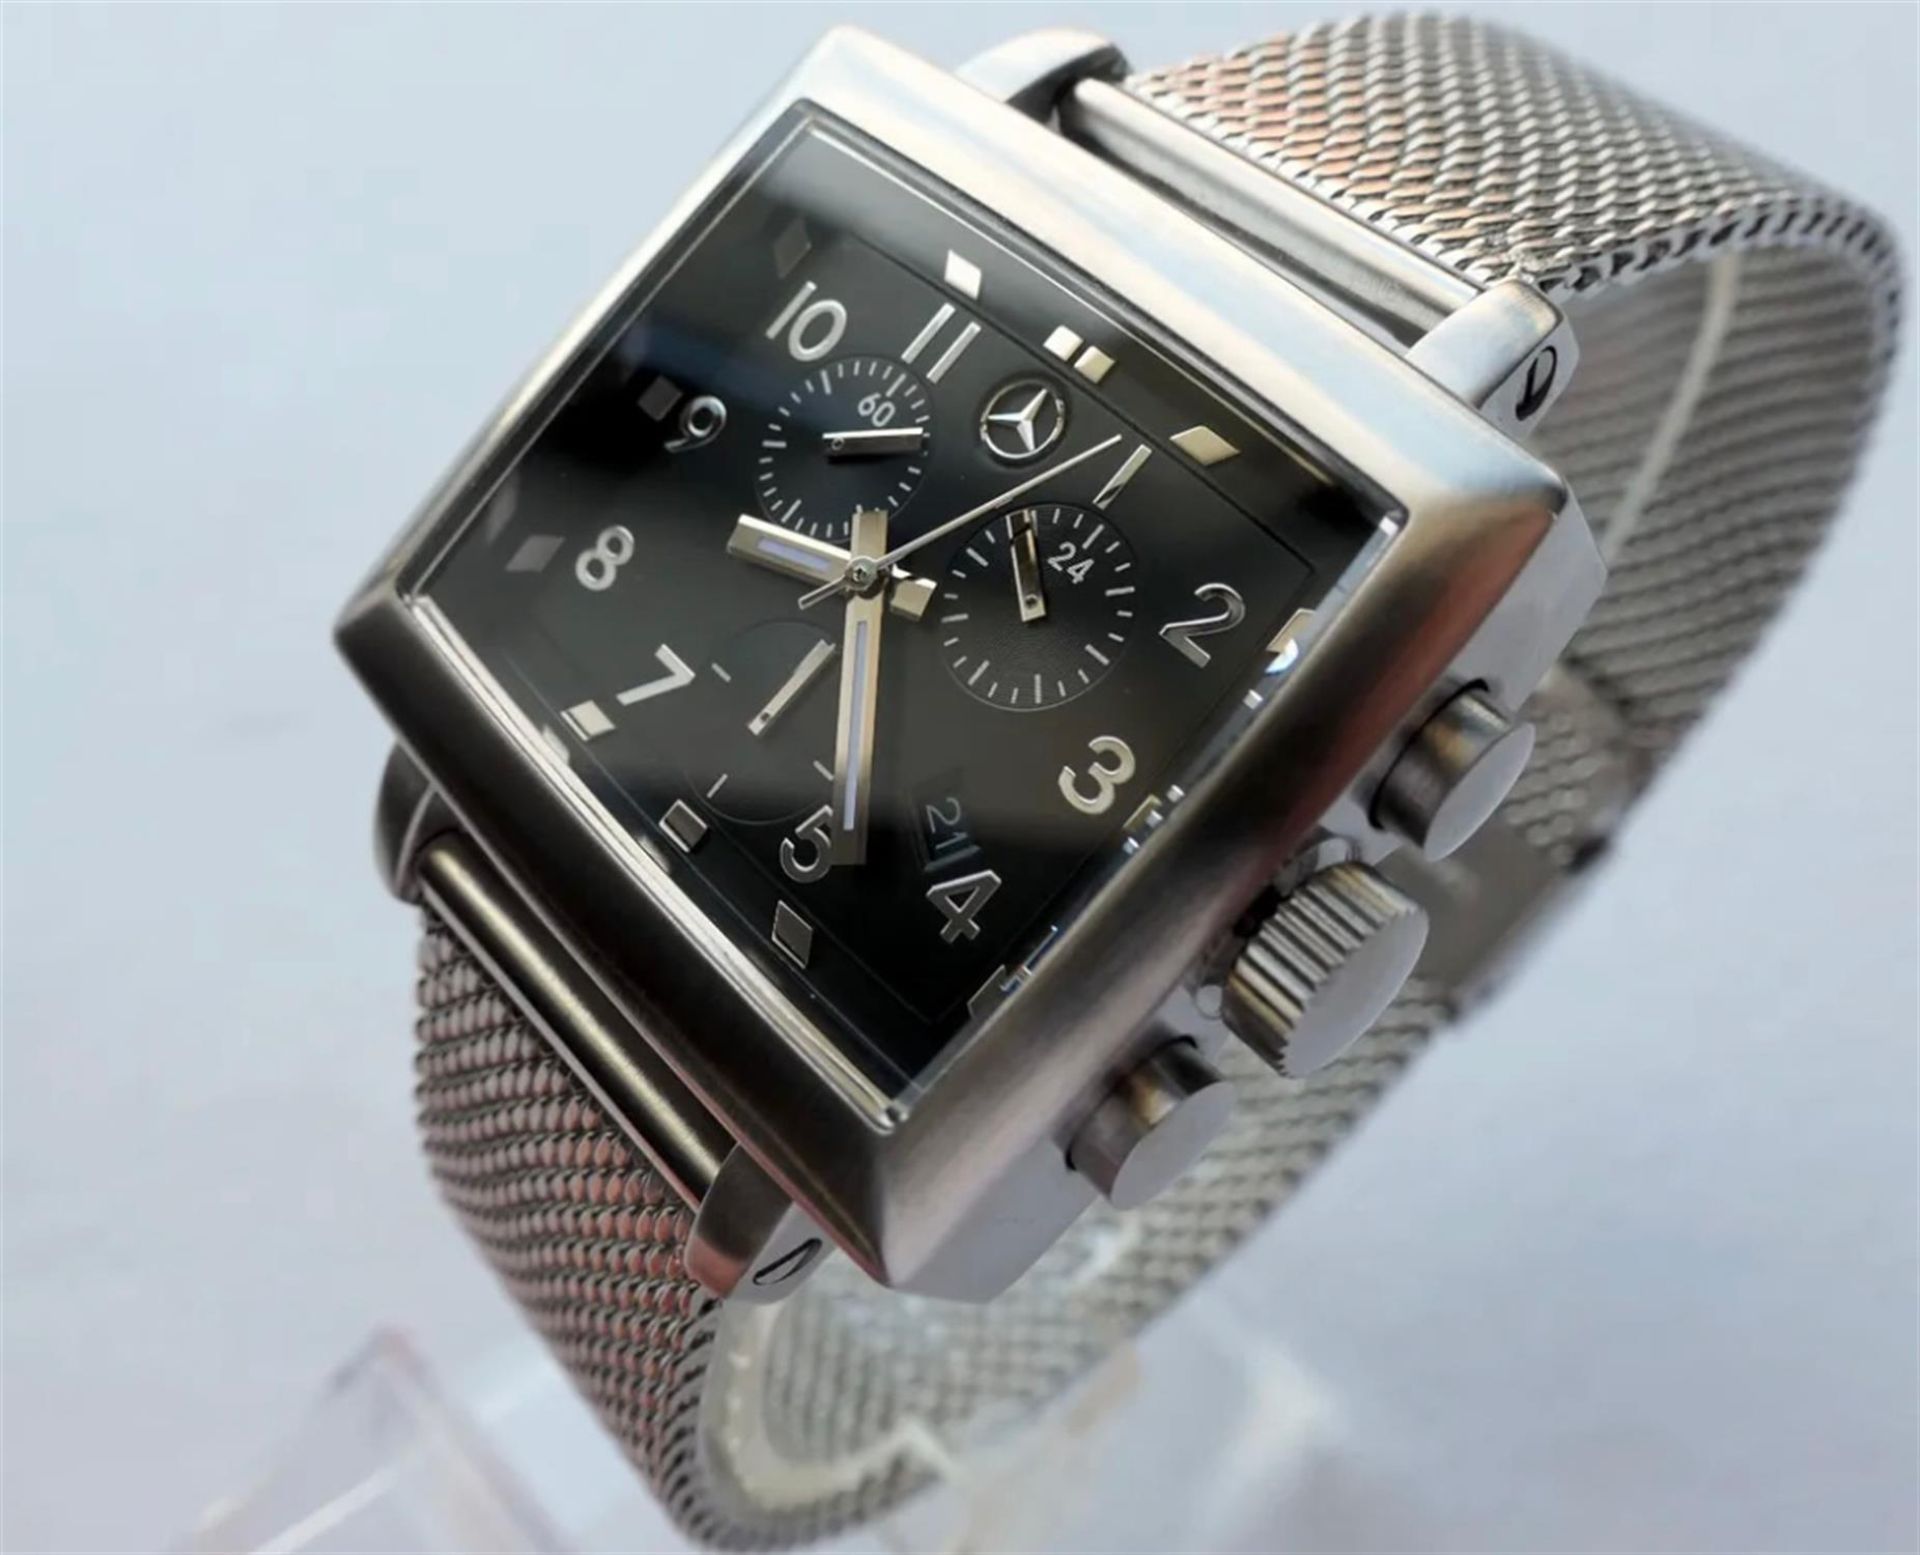 An Equisite Mercedes-Benz 'TV Dial' Chronograph - Image 2 of 10